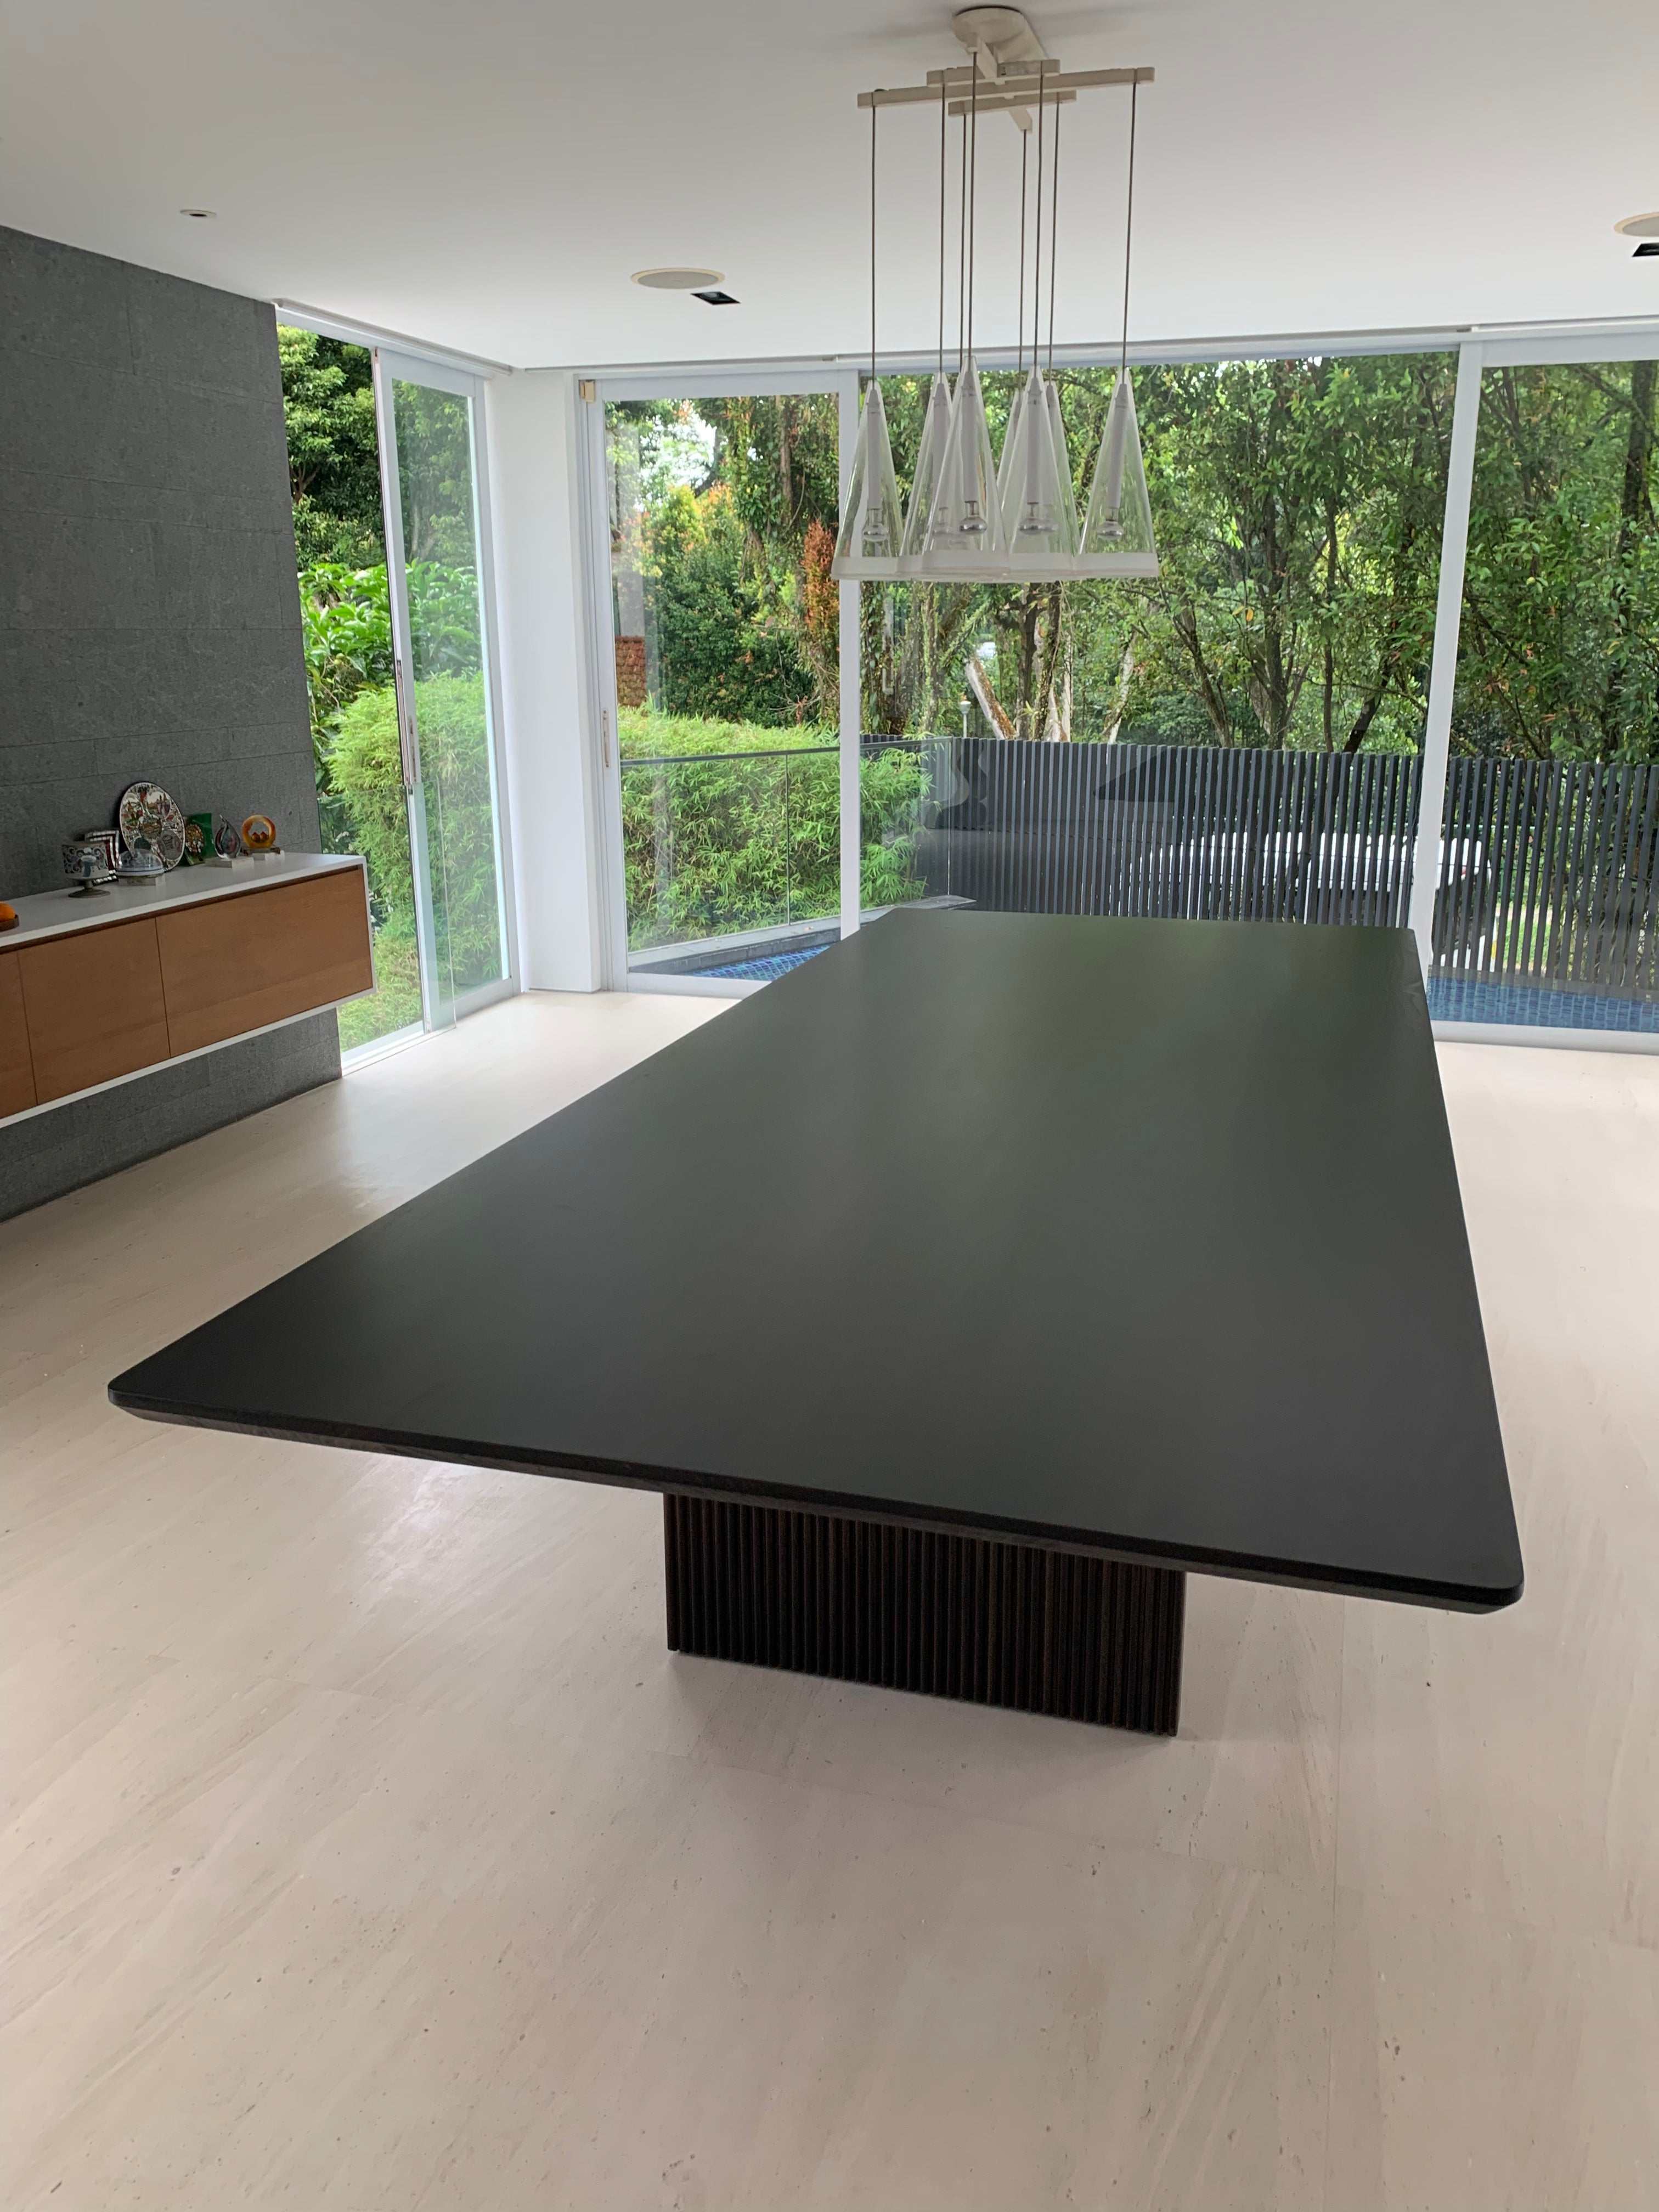 SAYLOR NEW YORK REGIS Minimalist Dining Table / Conference Table